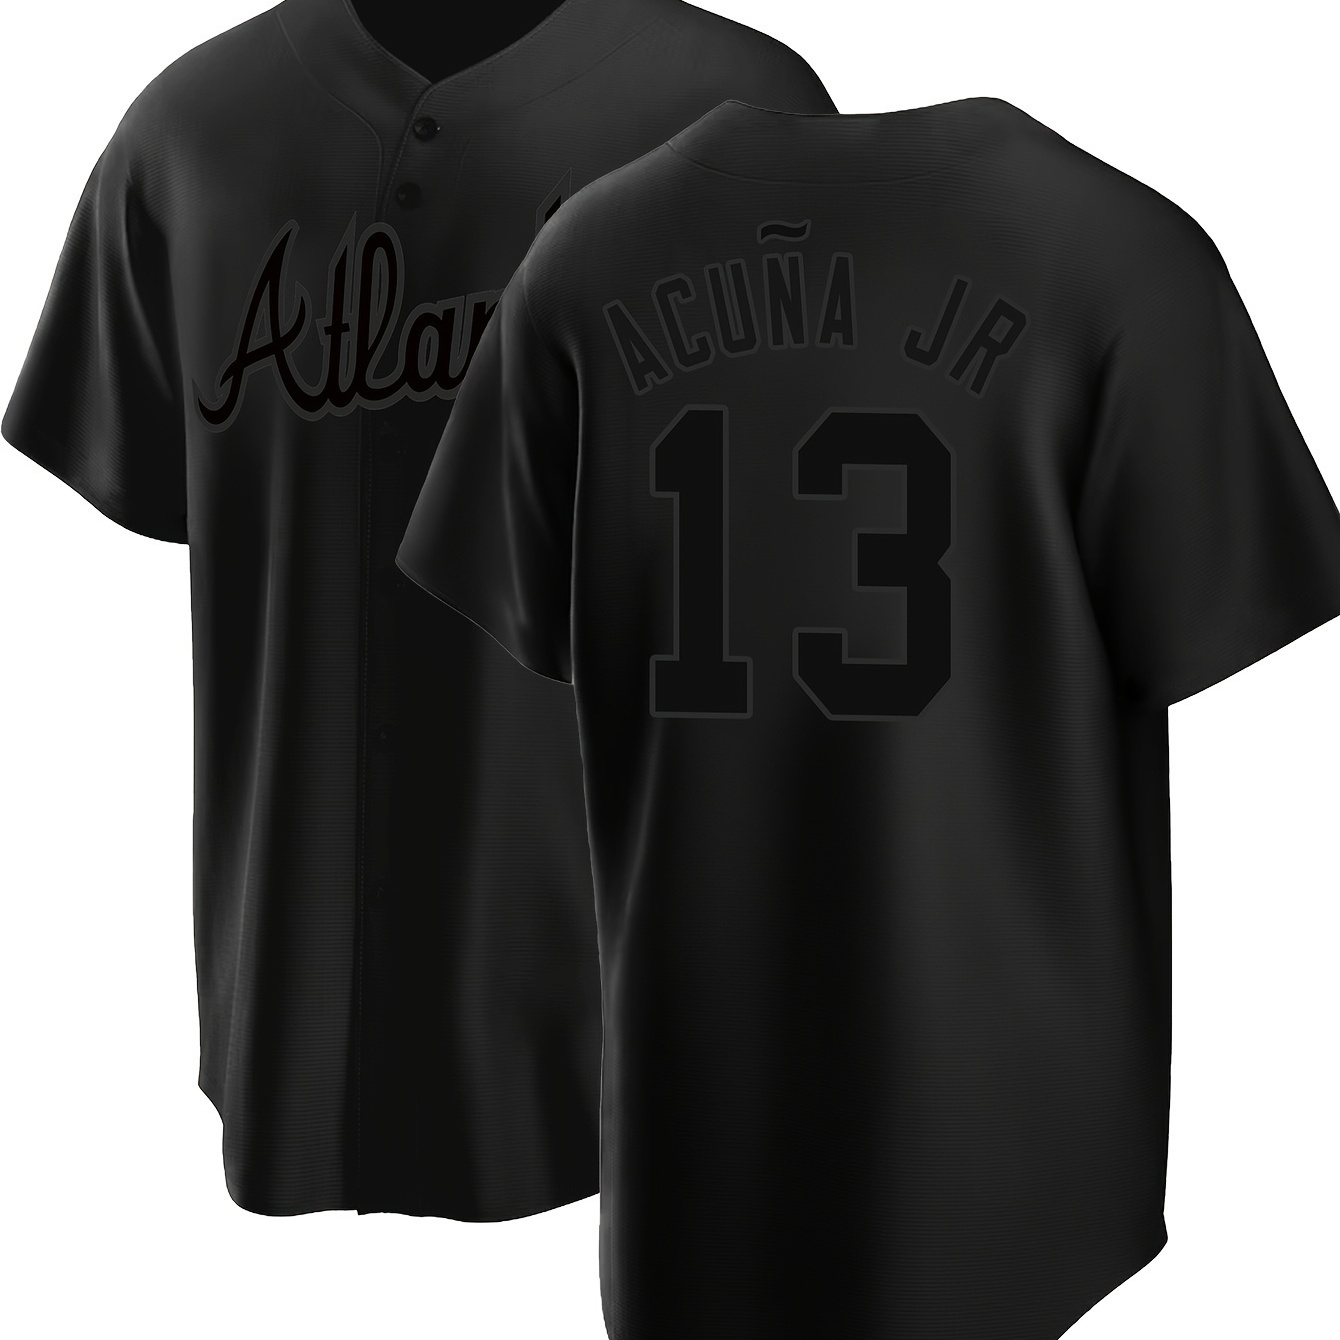 

Men's All Black # 13 Baseball Shirt, Classic Letter Embroidery Design, Button Style Short Sleeved Breathable Shirt, Used For Training And Competition